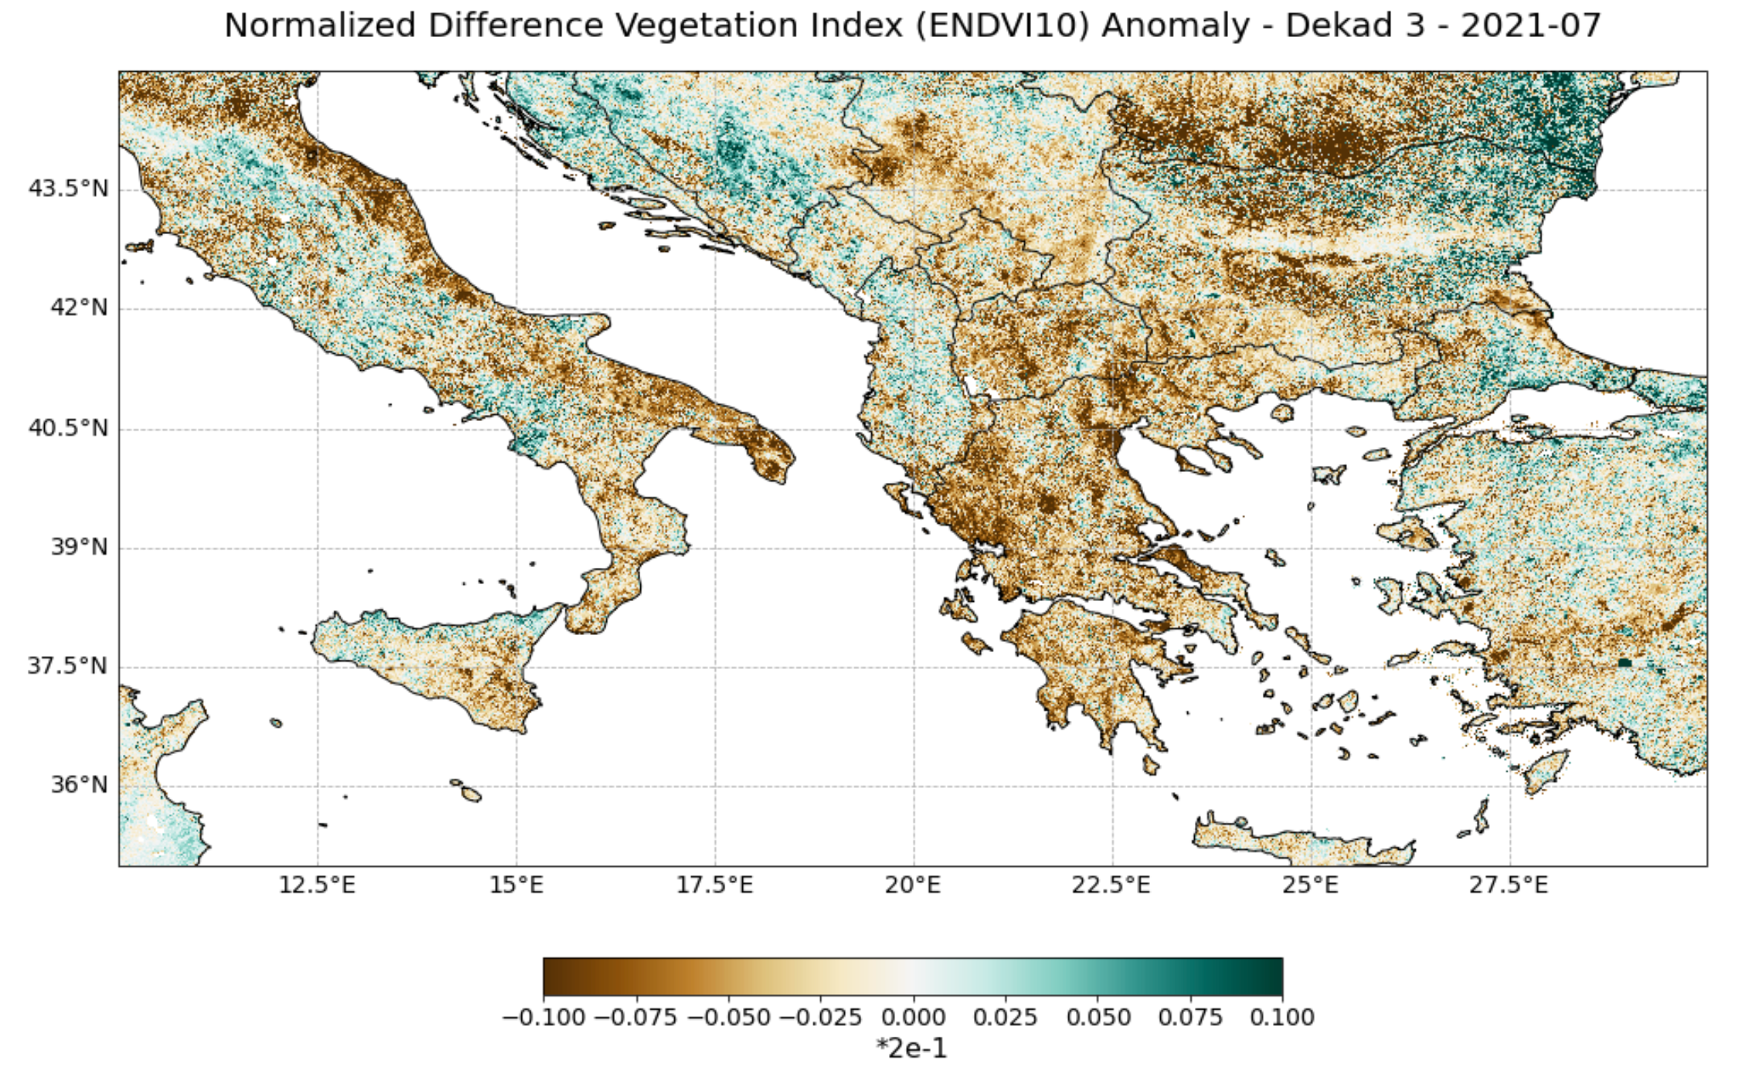 Figure 1. NDVI Anomaly for the last dekad of July 2021, as calculated with a reference period between 2010 and 2020.